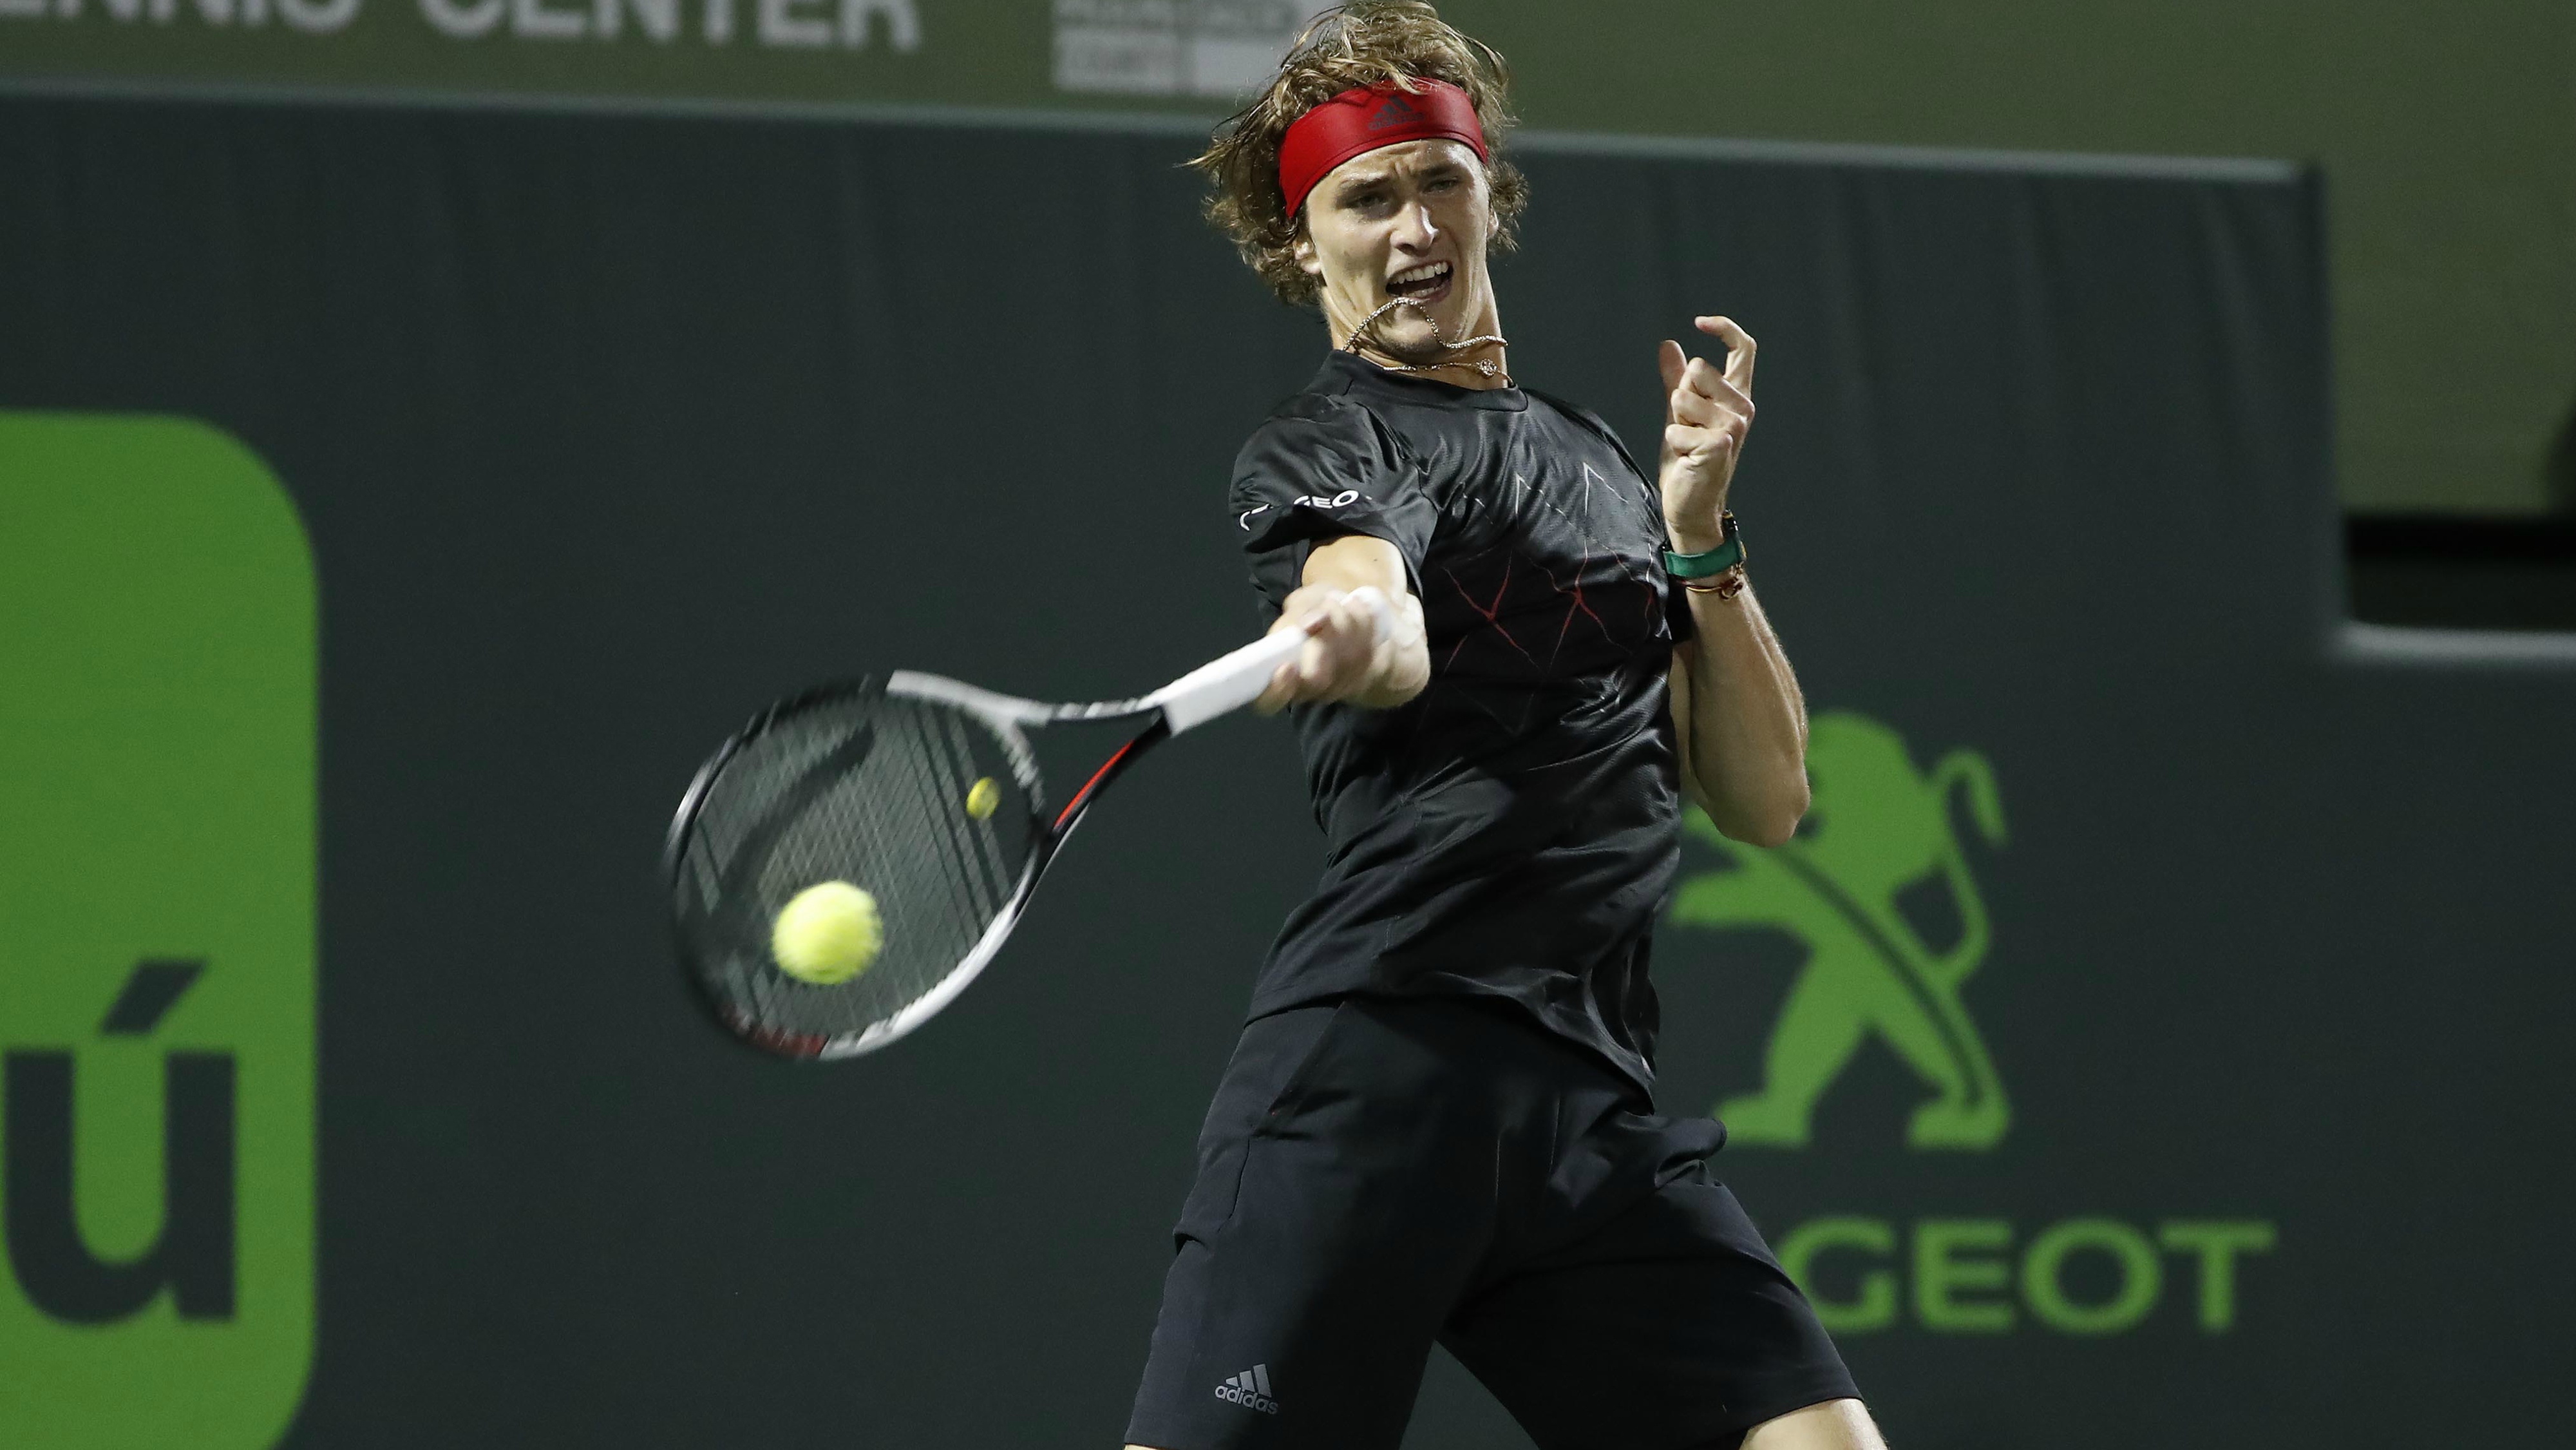 Miami Open: Alexander Zverev sets up fourth round clash with Nick Kyrgios4000 x 2251